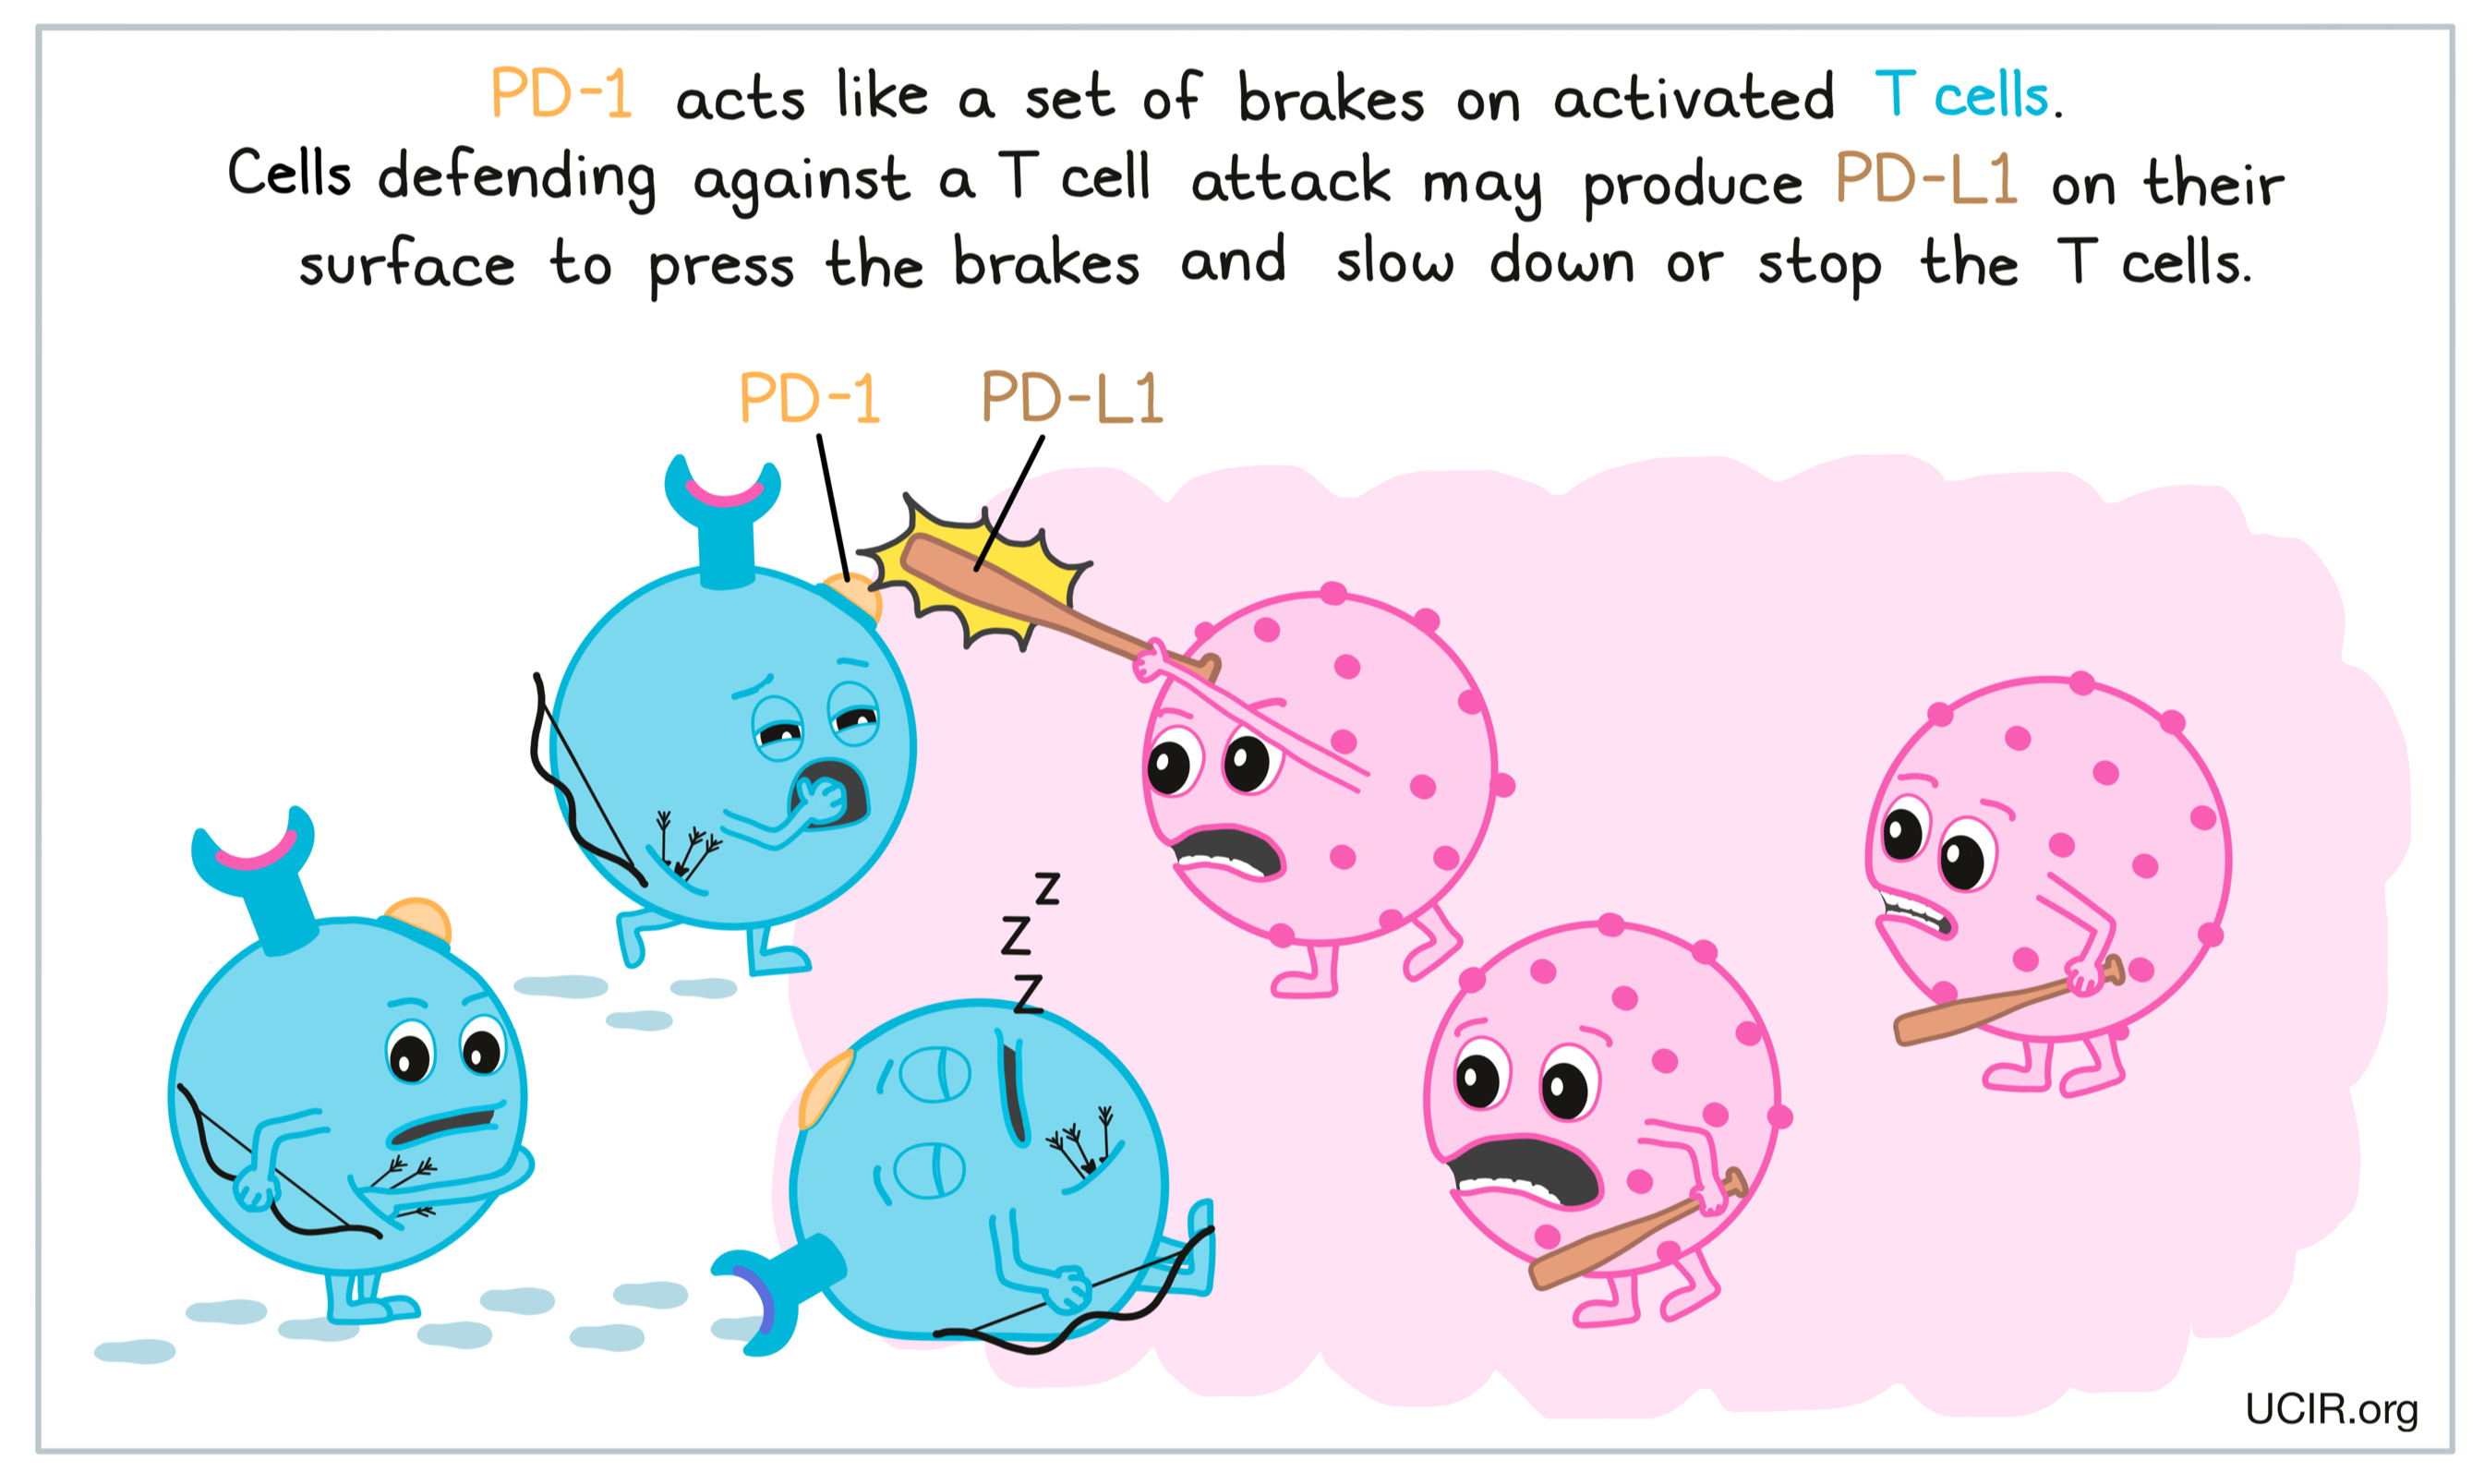 PD-1 acts like a set of brakes on activated T cells